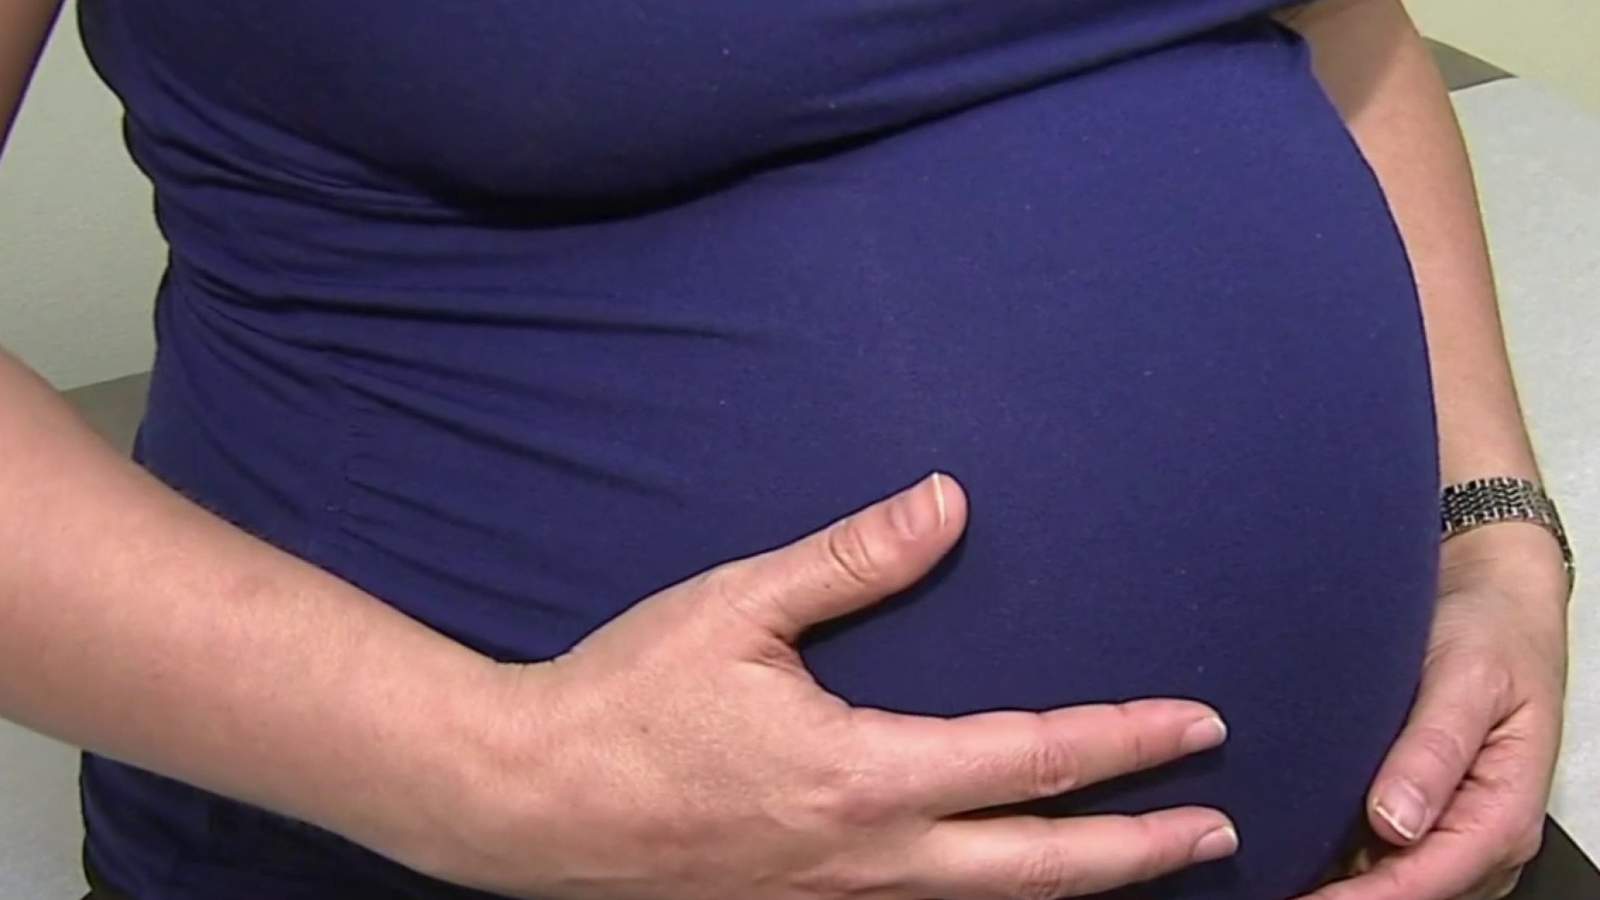 Pregnant women urged to discuss vaccine risks, benefits with doctor